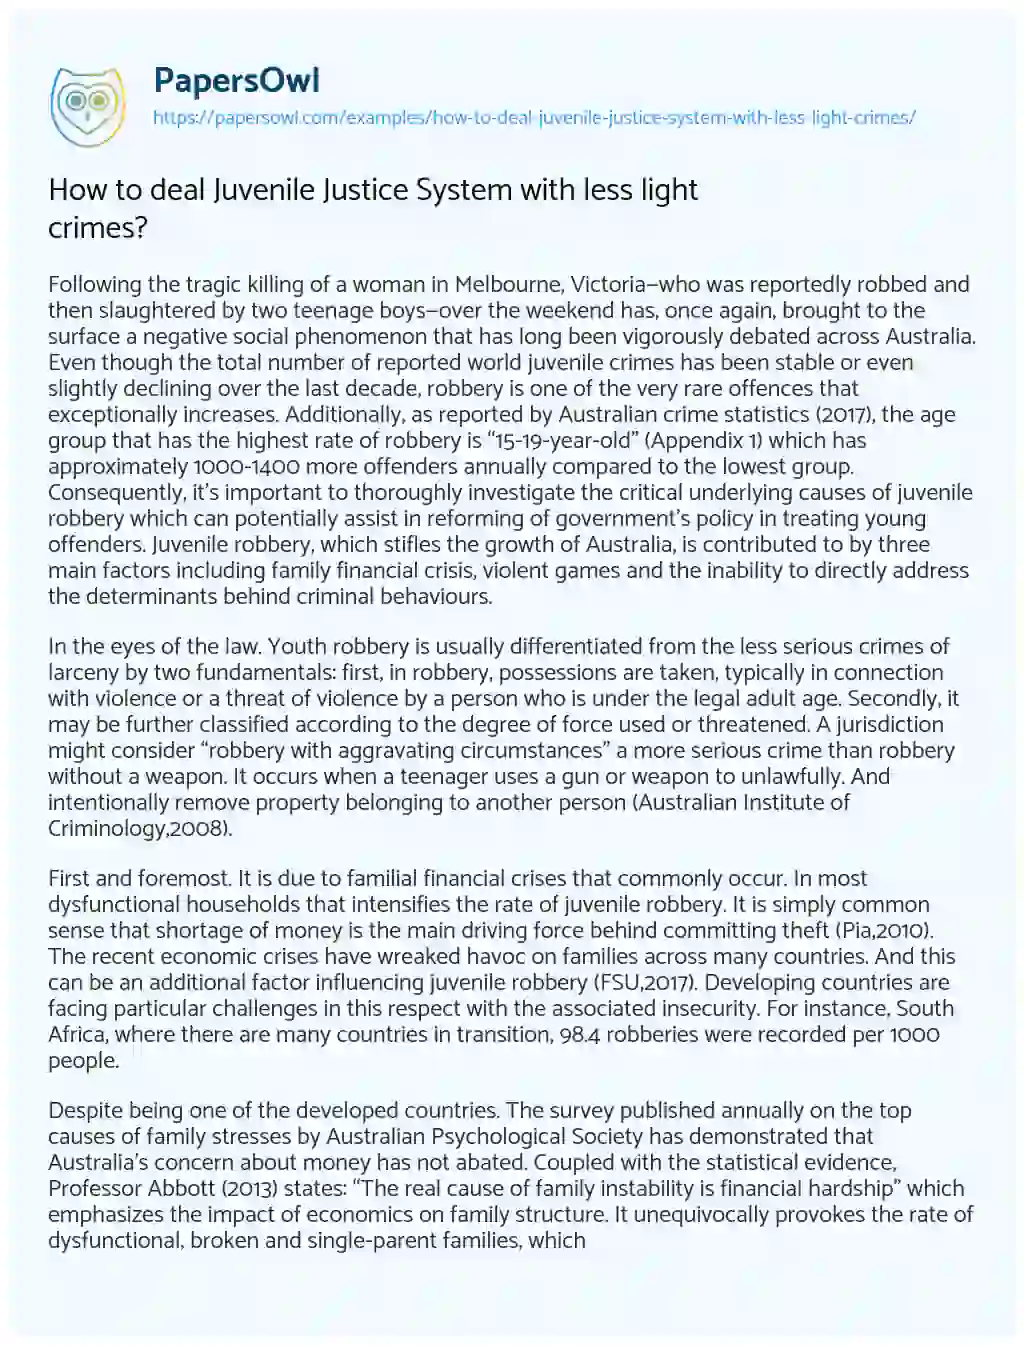 Essay on How to Deal Juvenile Justice System with Less Light Crimes?